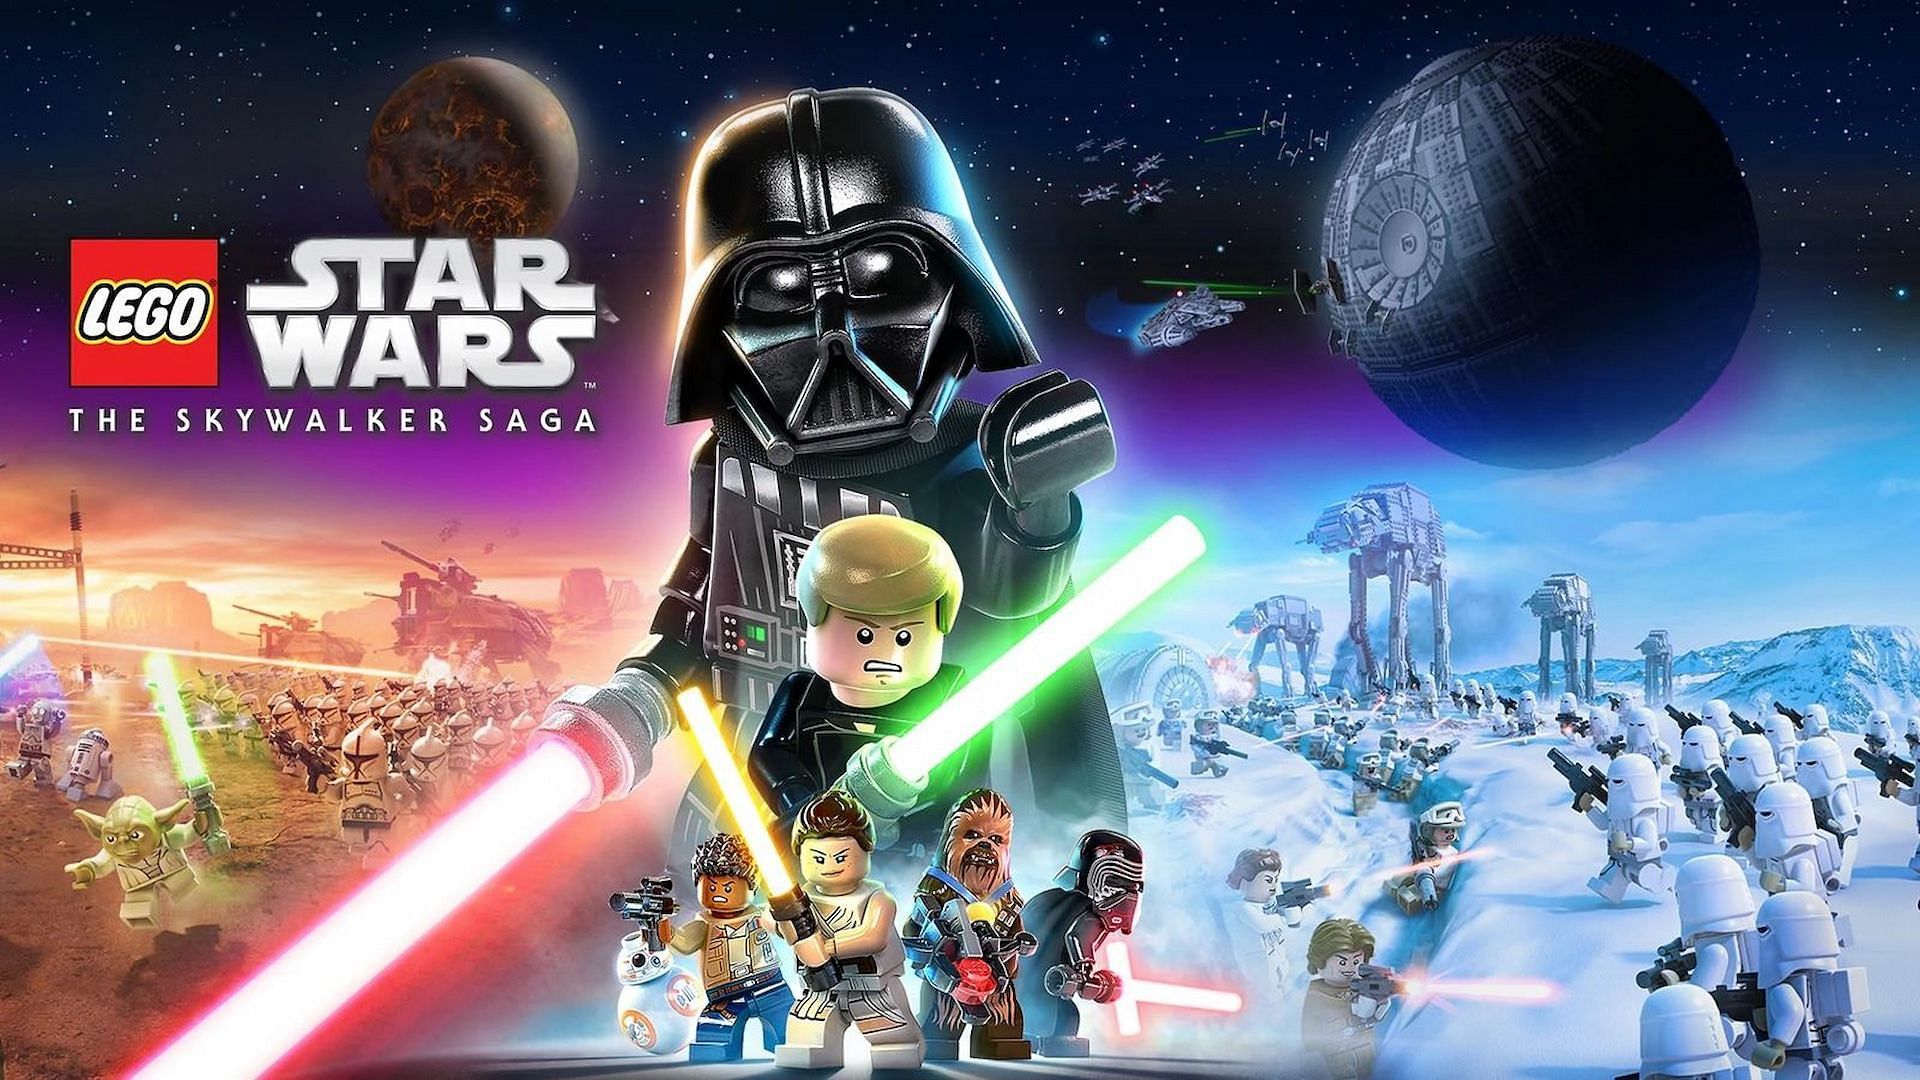 Players can complete many challenges in Lego Star Wars: The Skywalker Saga to earn unique rewards (Image via Warner Bros.)